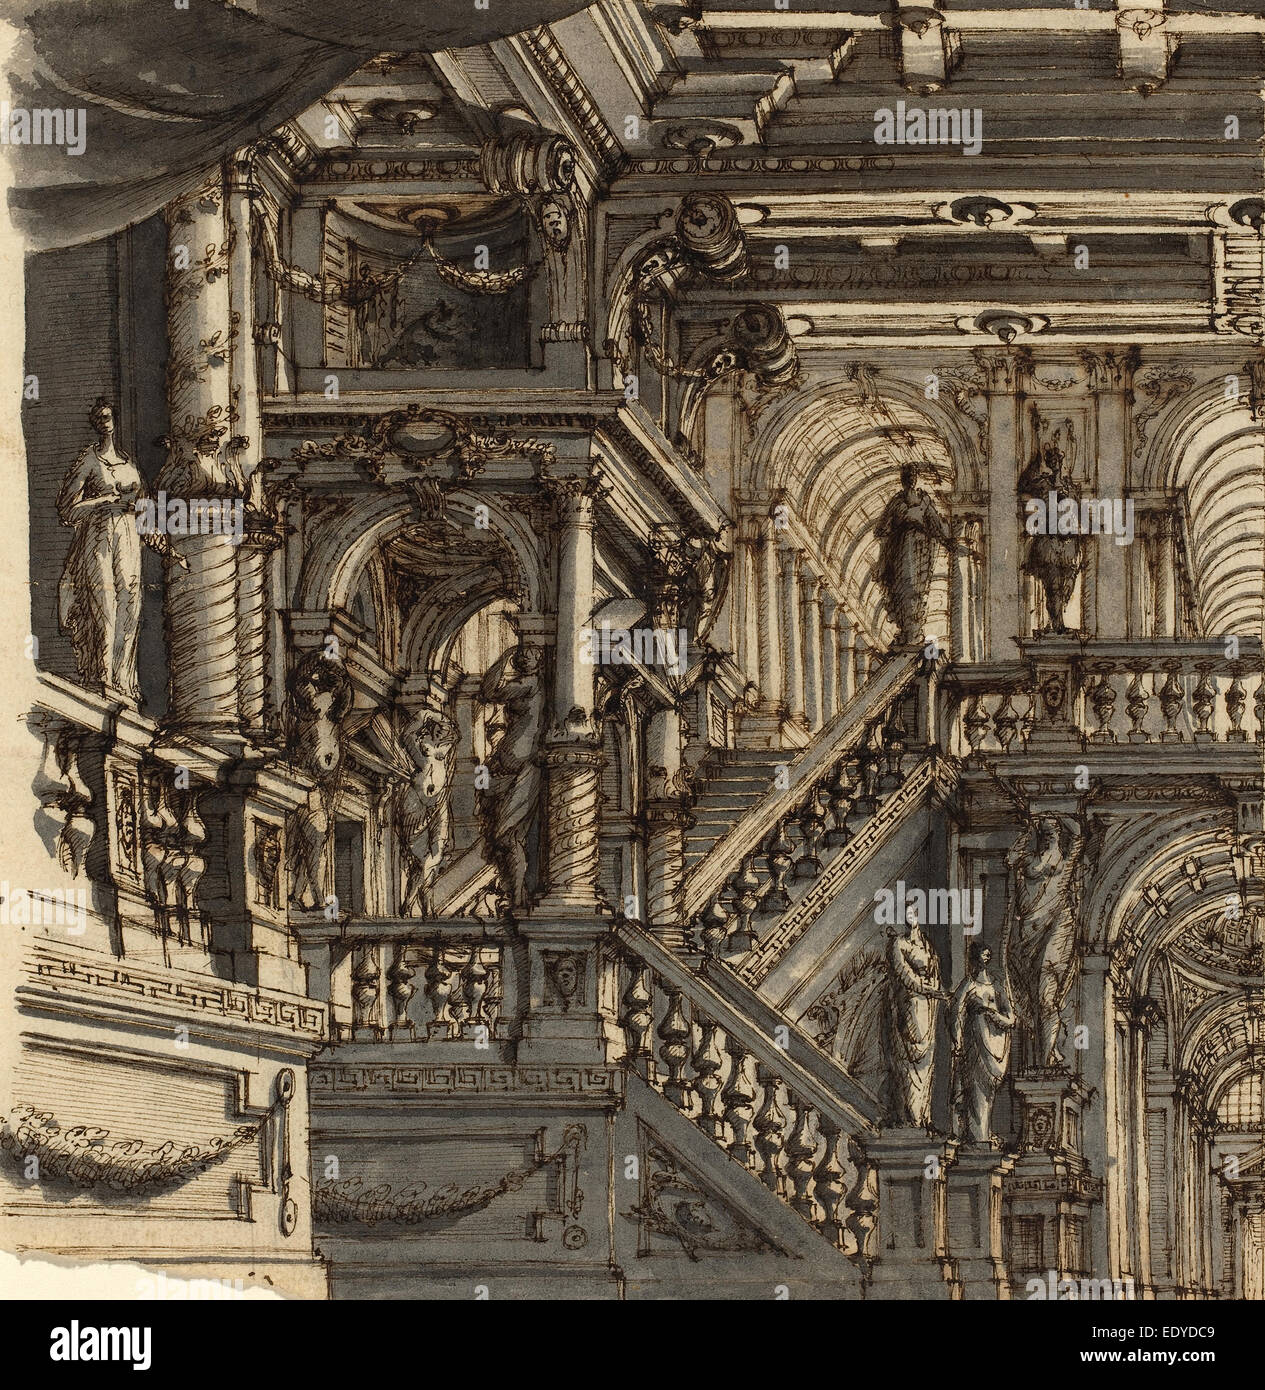 Bibiena (family member) (Italian, active 18th century), An Elaborate Staircase in a Palace, pen and brown ink with gray wash Stock Photo